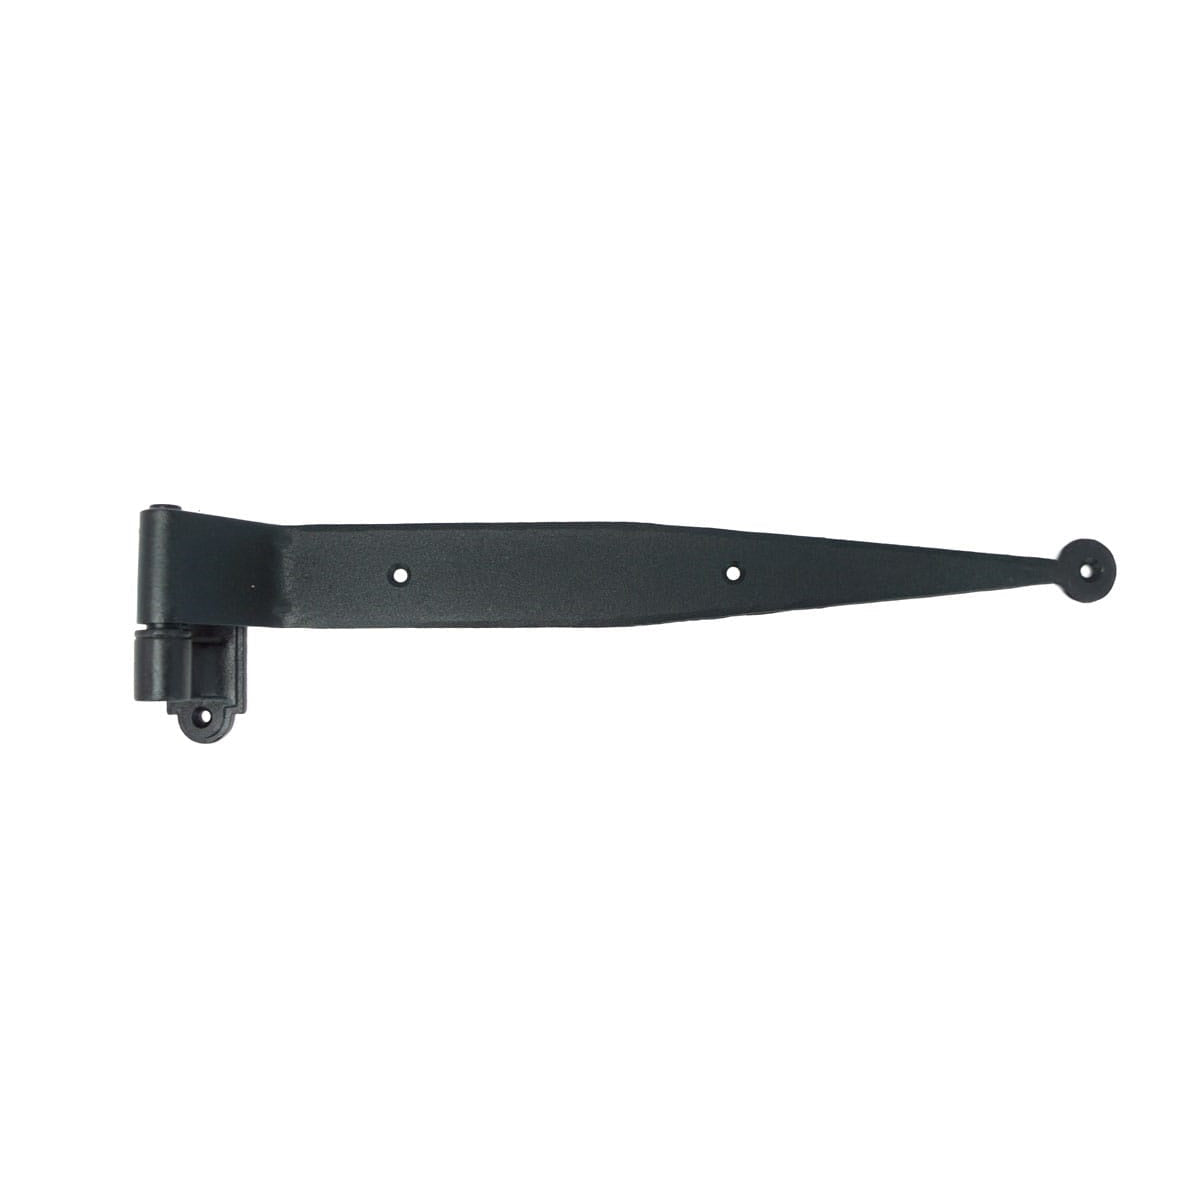 Strap Hinge for Shutters - Circle Tip - 12&quot; Inch - Multiple Offsets Available - Black Powder Coat Finish - Sold Individually